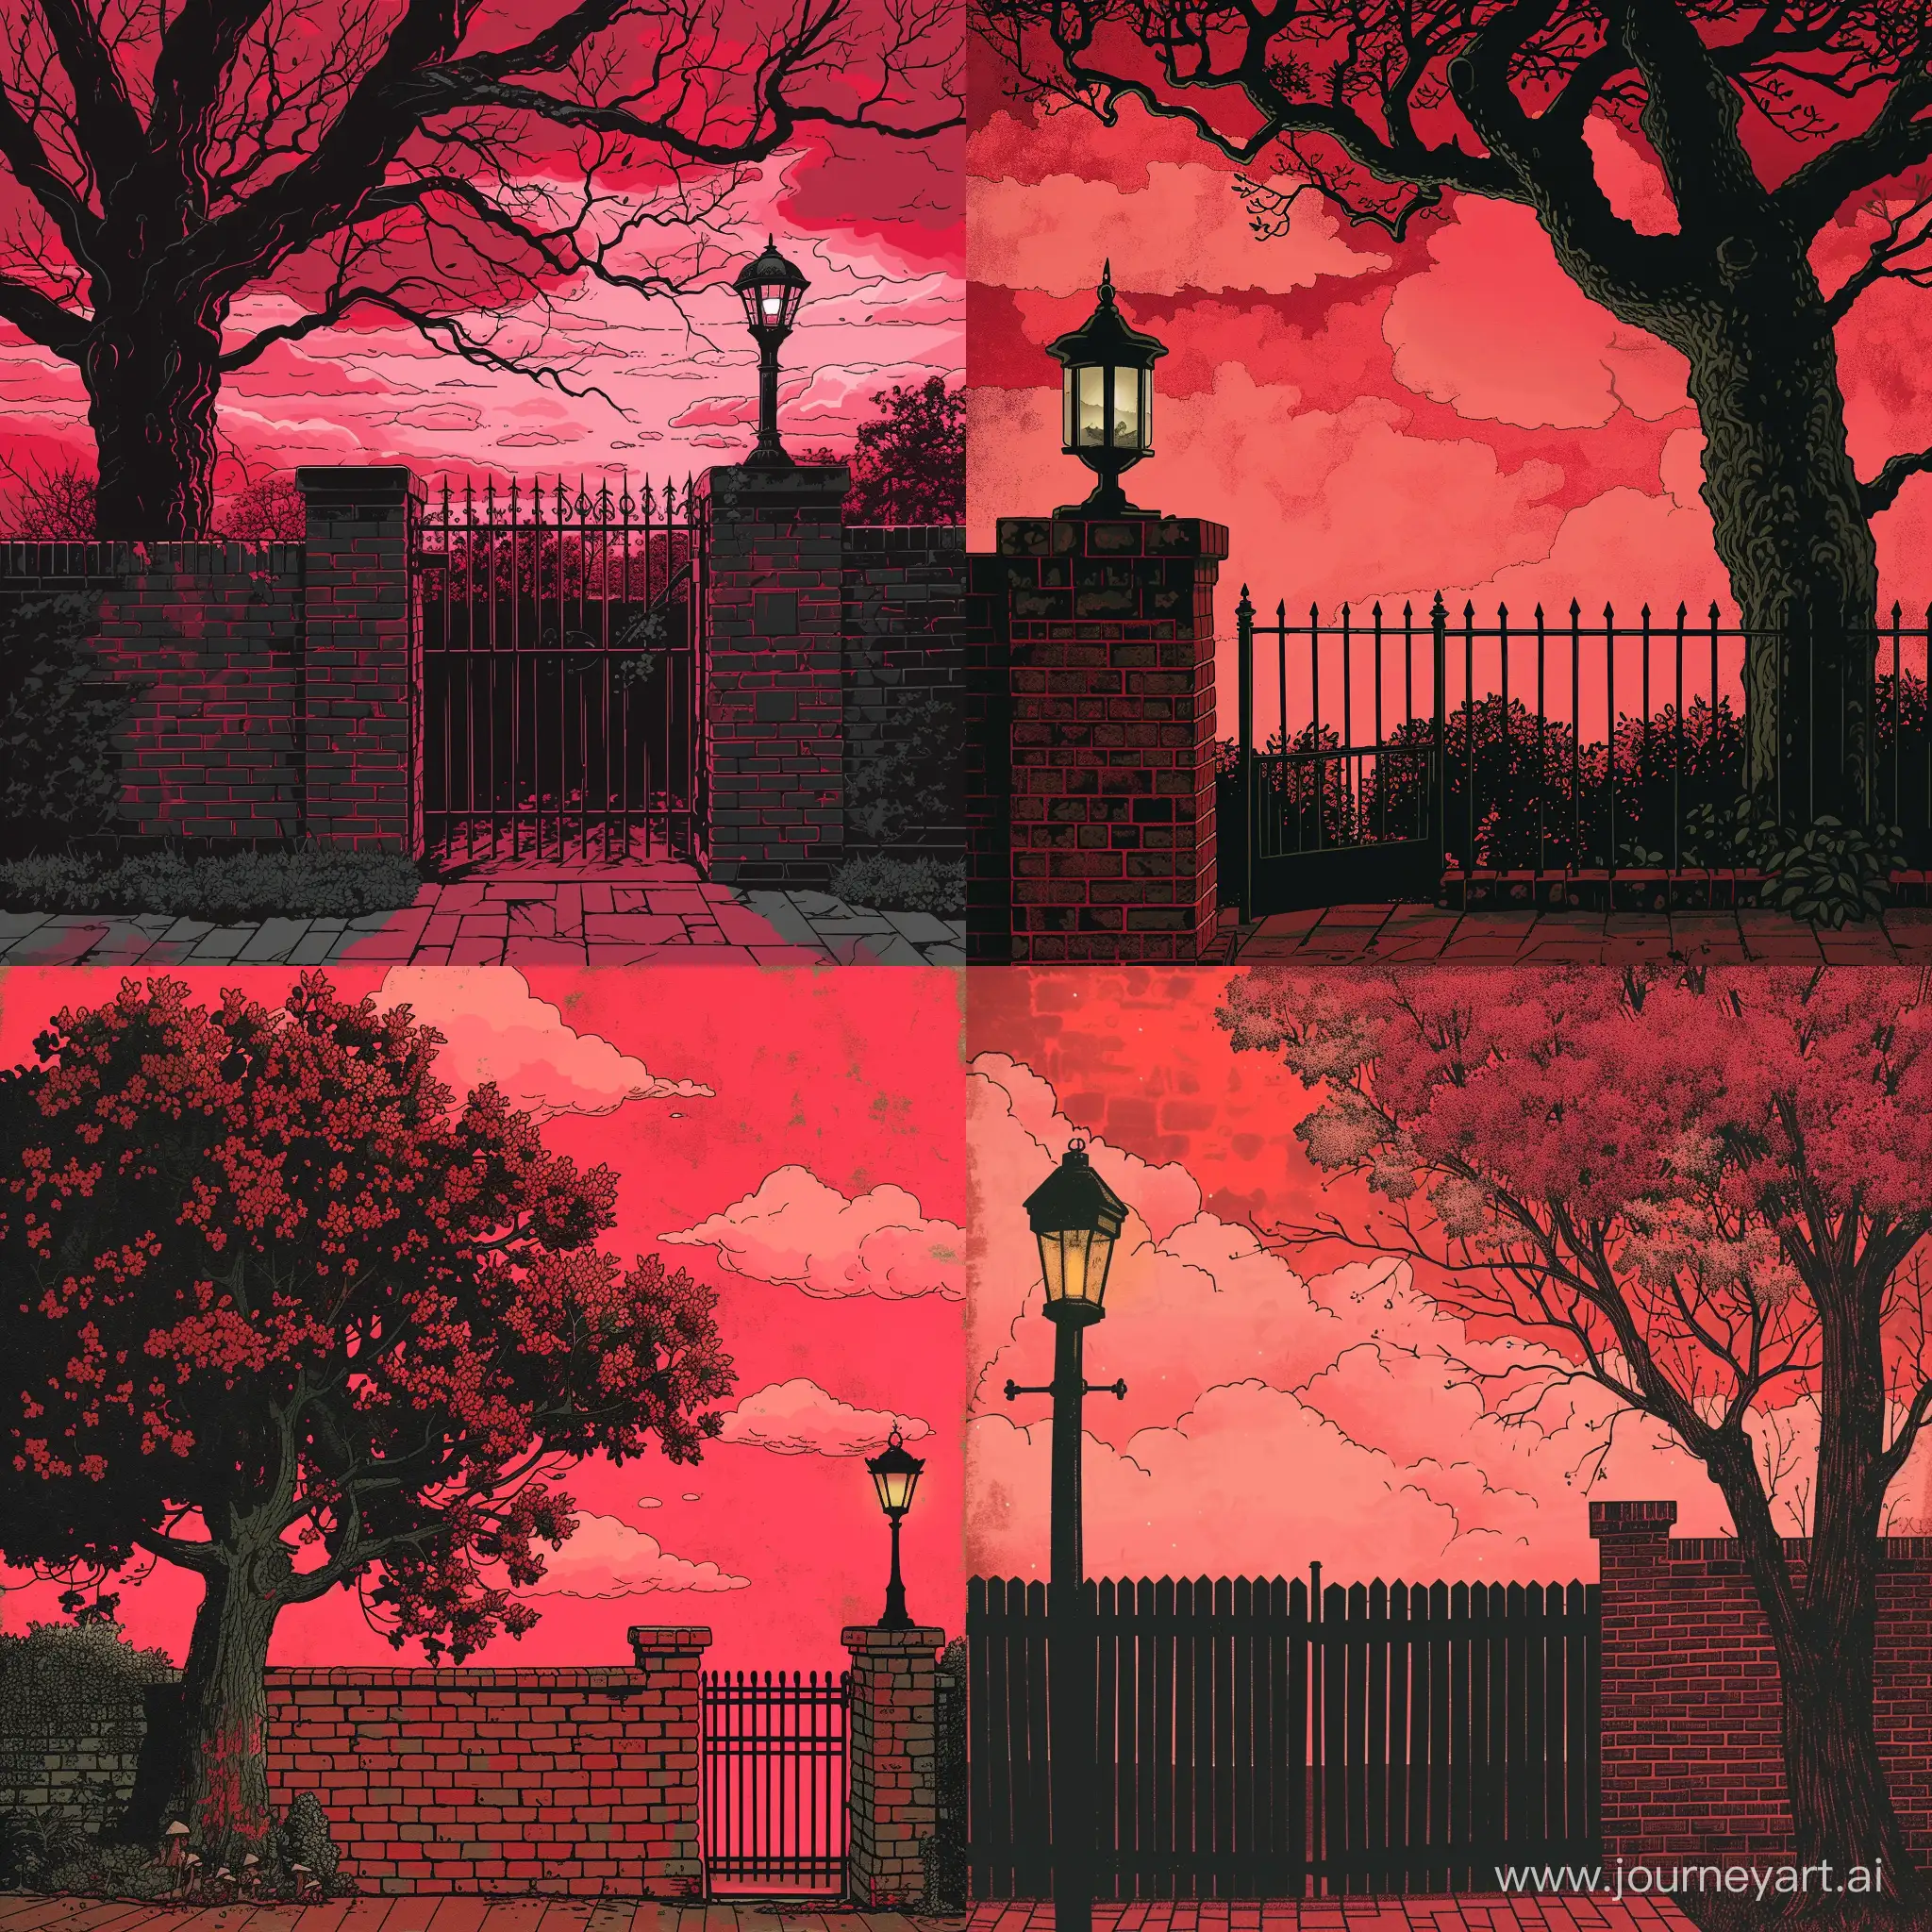 Brick fence, front view, there is a lantern lamp on the fence, red sky with pink clouds, next to the tree, the style of the old illustration, the tones are red, black and pink